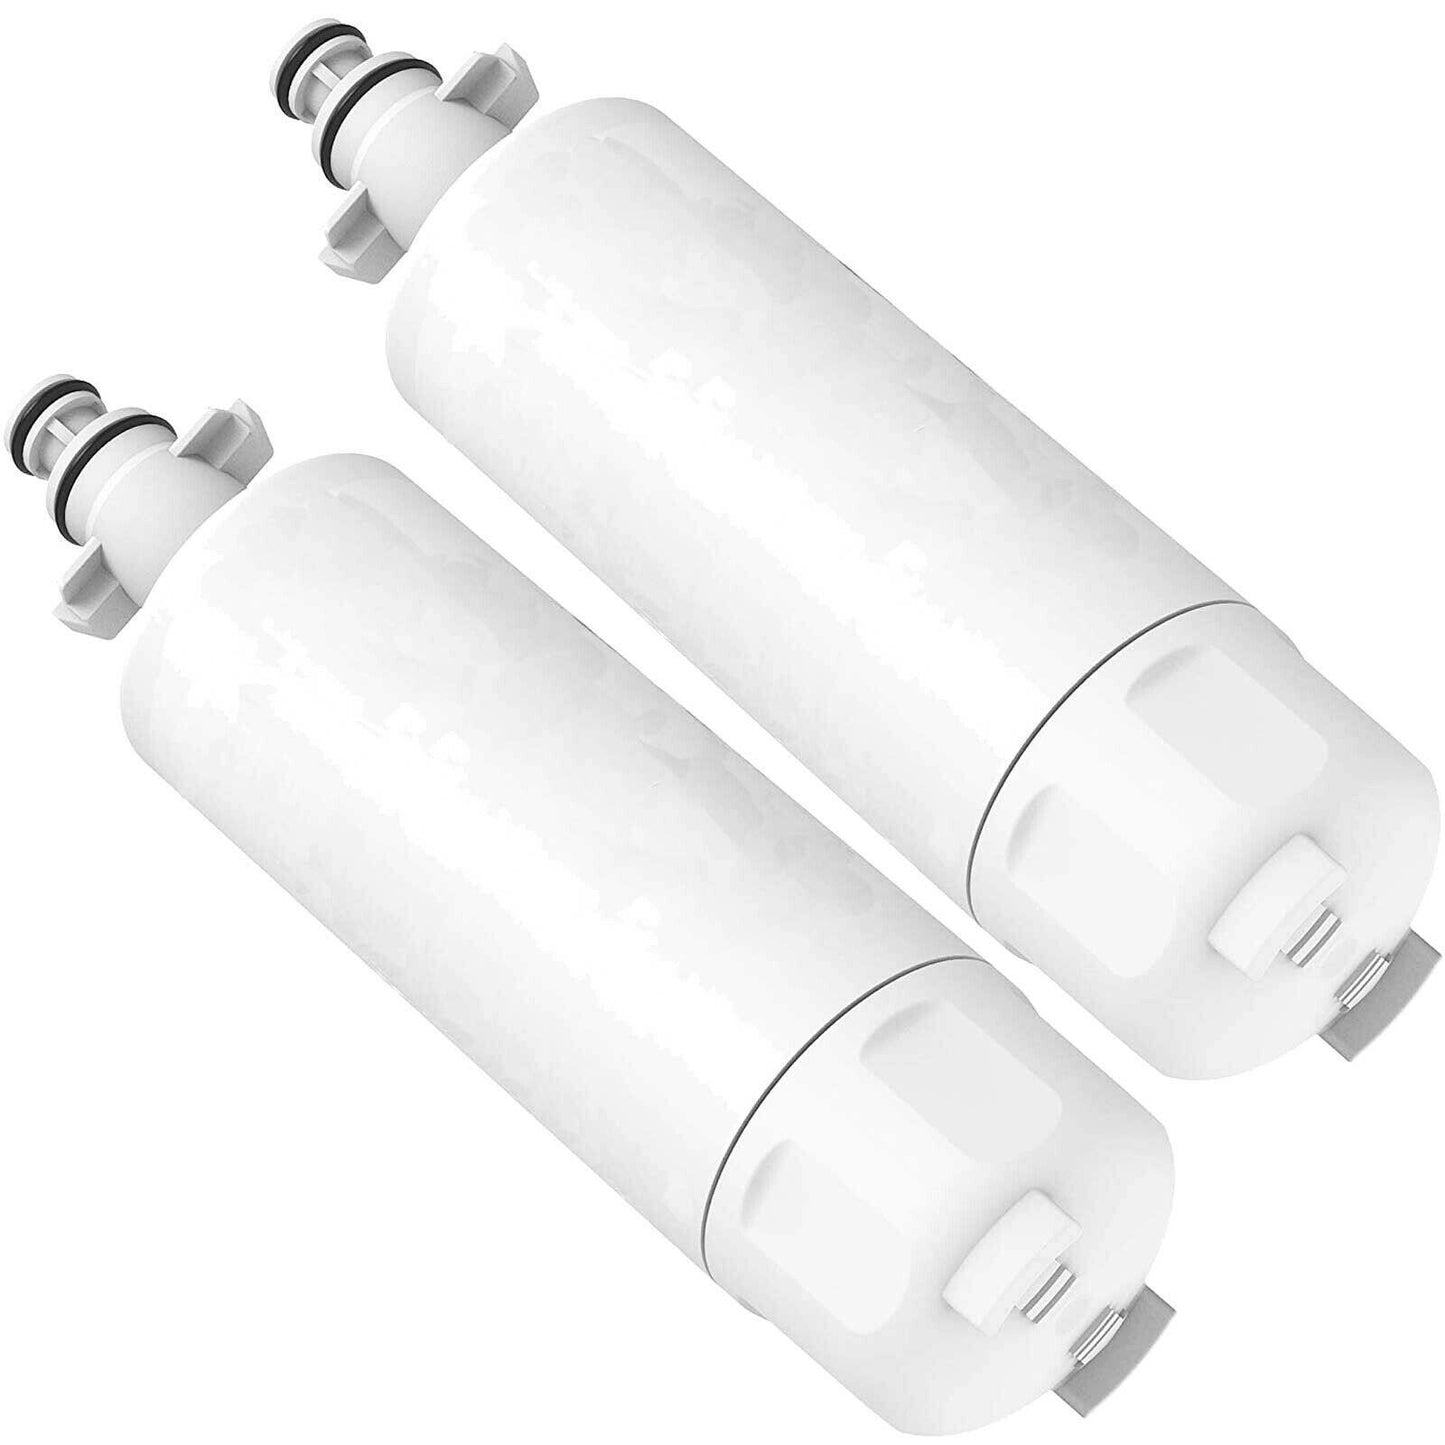 Refrigerator Water Filter Replacement for Beko 4918450200 4346650401 9256712 Sparesbarn